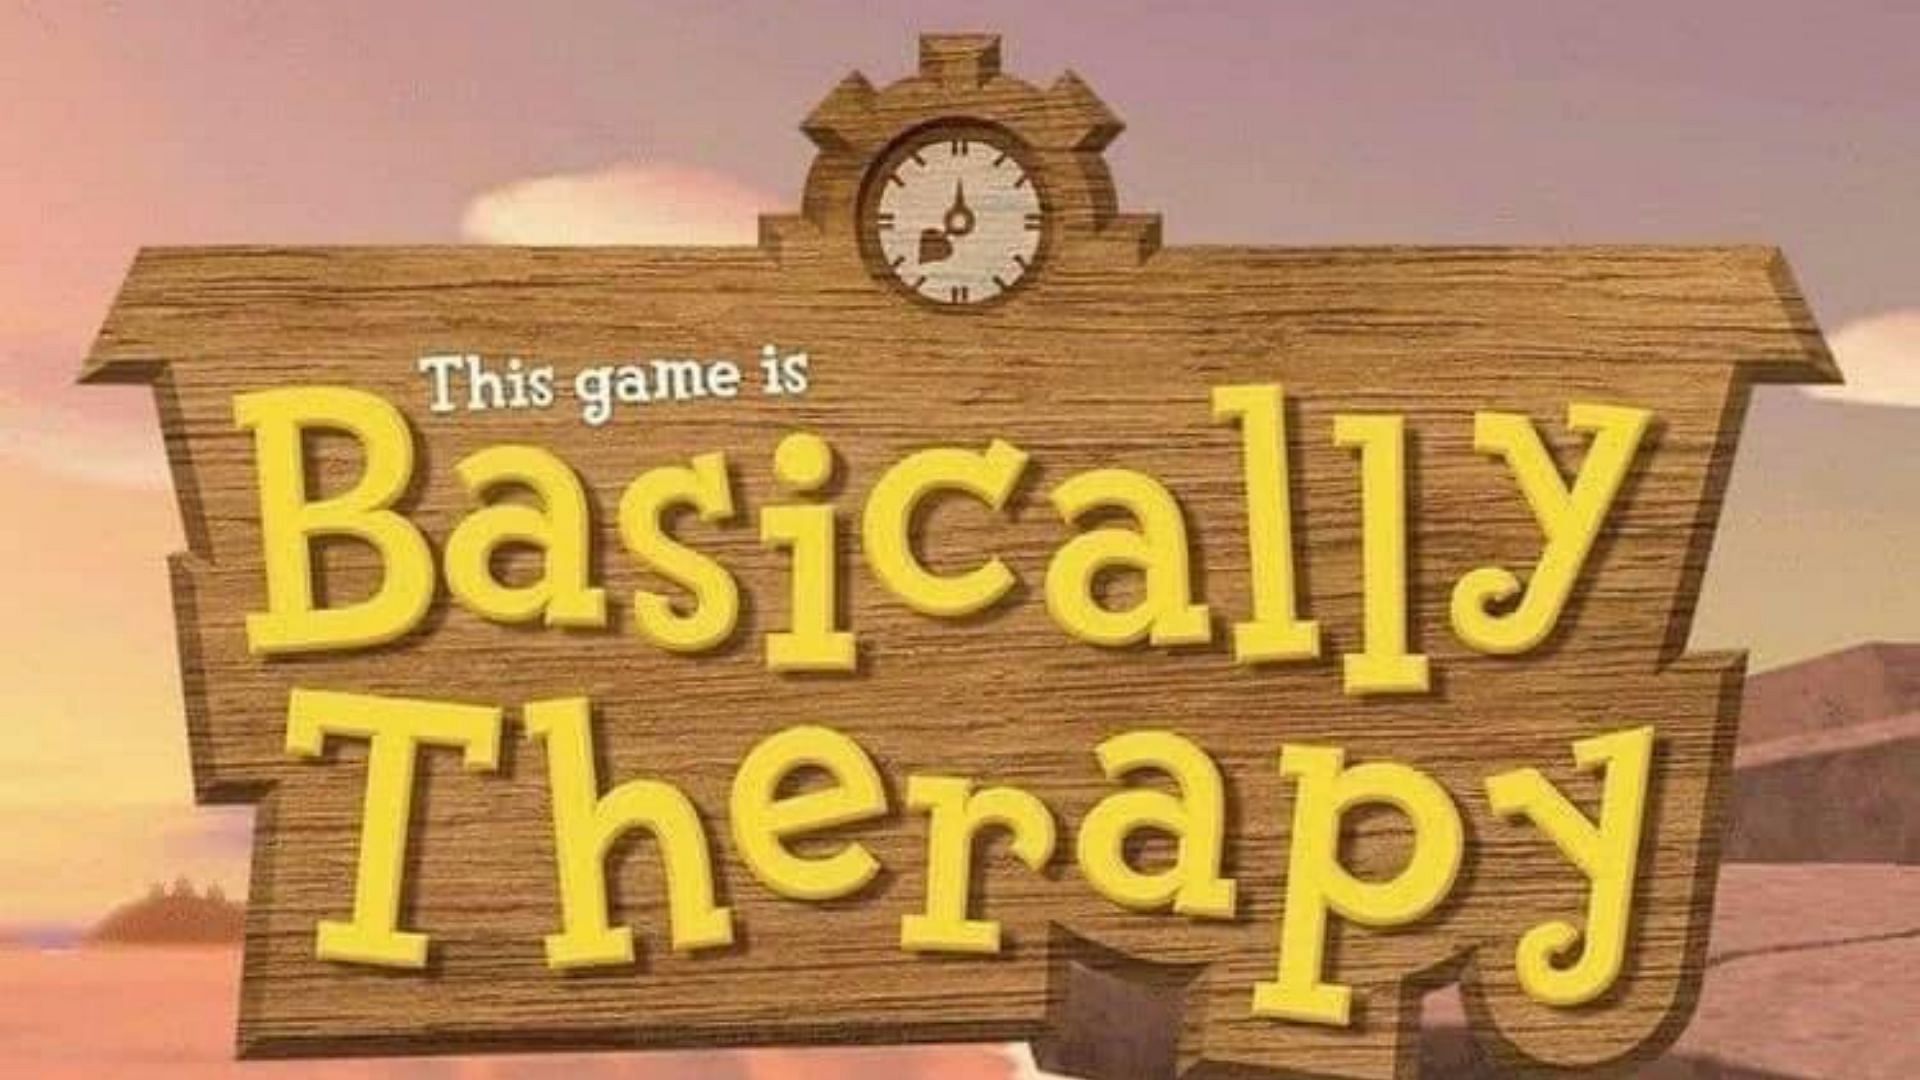 Animal Crossing: New Horizons fans have labeled the game a kind of therapy (Image via @faerysapphic/Twitter)